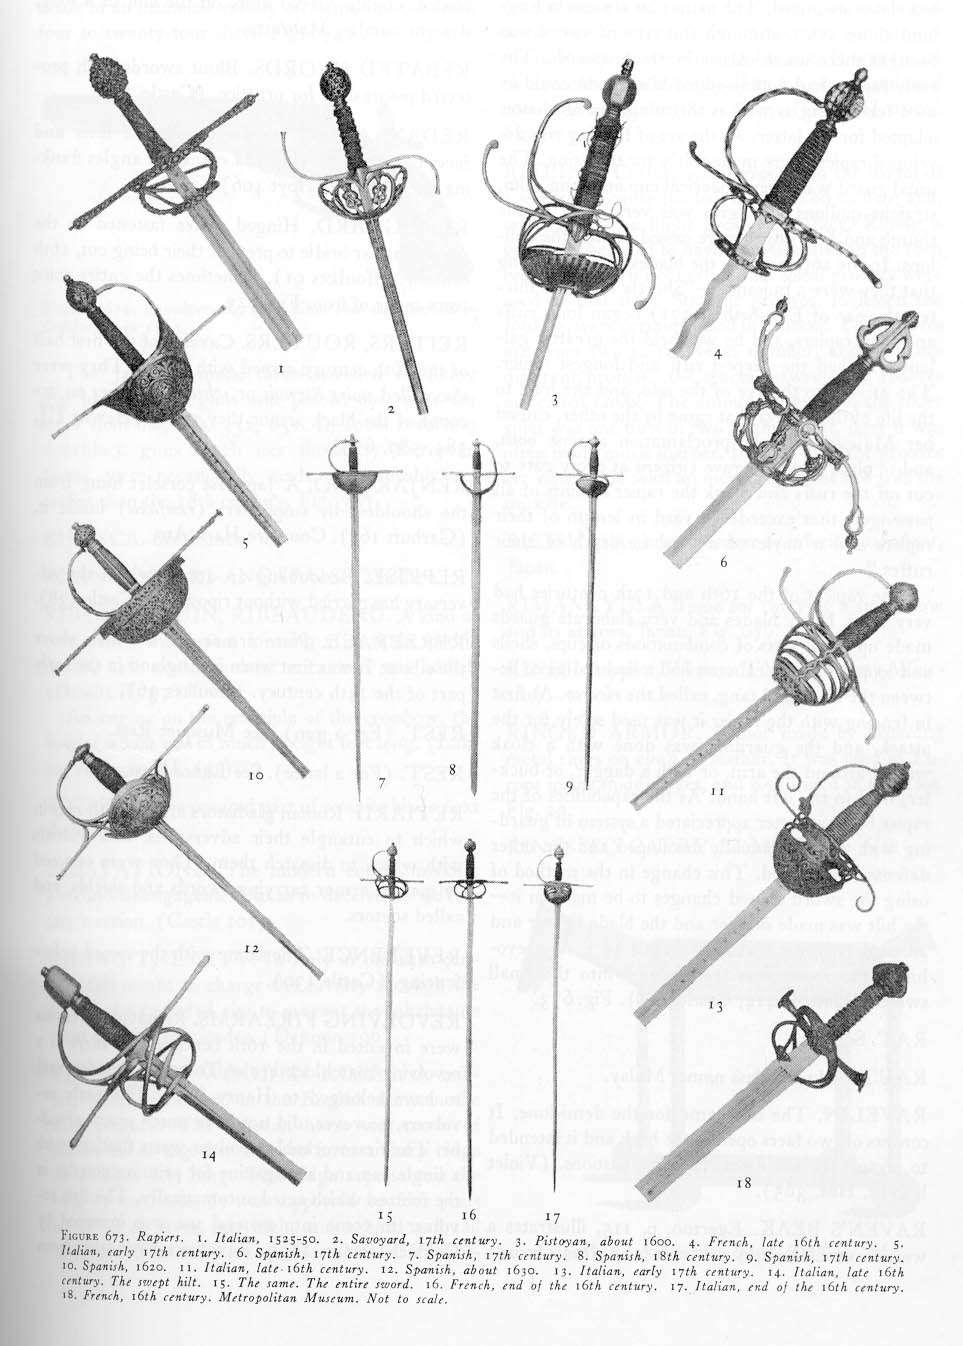 Appendix E: Rapiers Image from George Cameron Stone's Arms and Armor (A Glossary of the